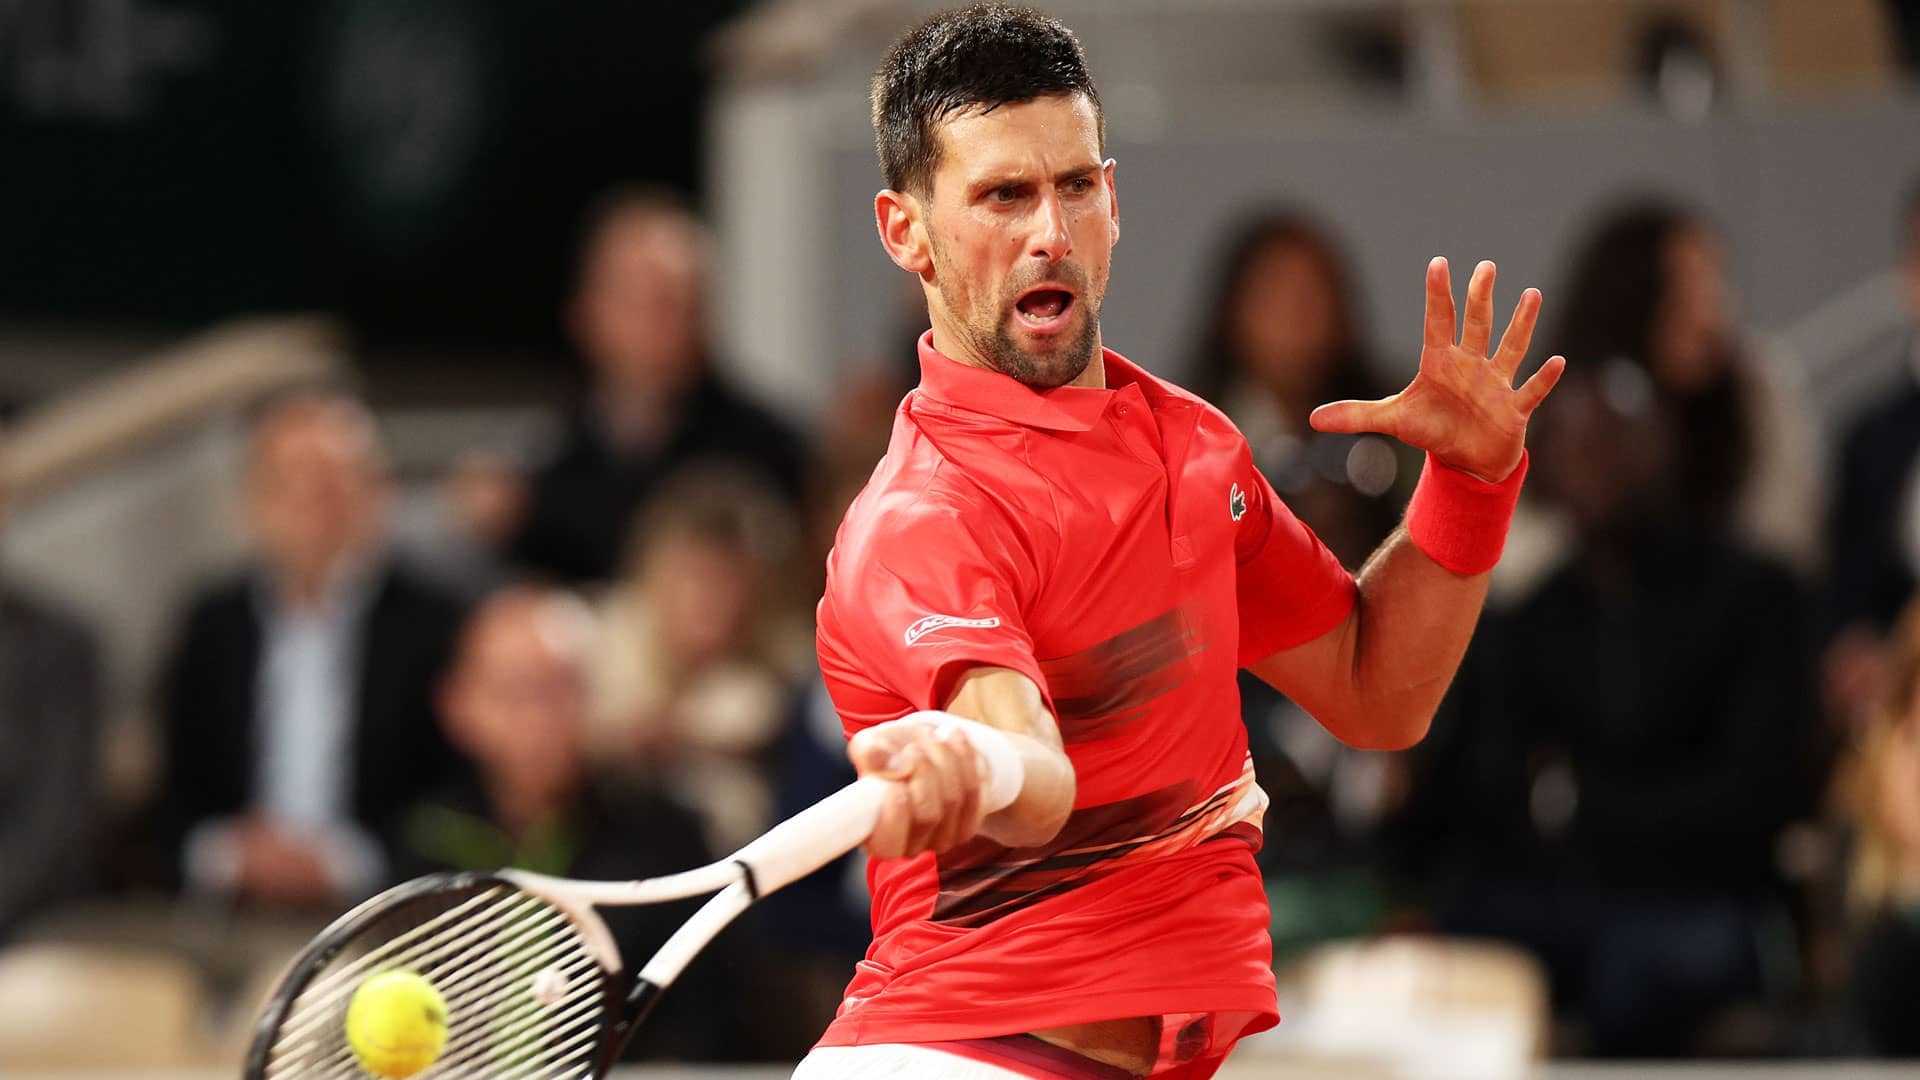 Novak Djokovic is making his 18th appearance at Roland Garros